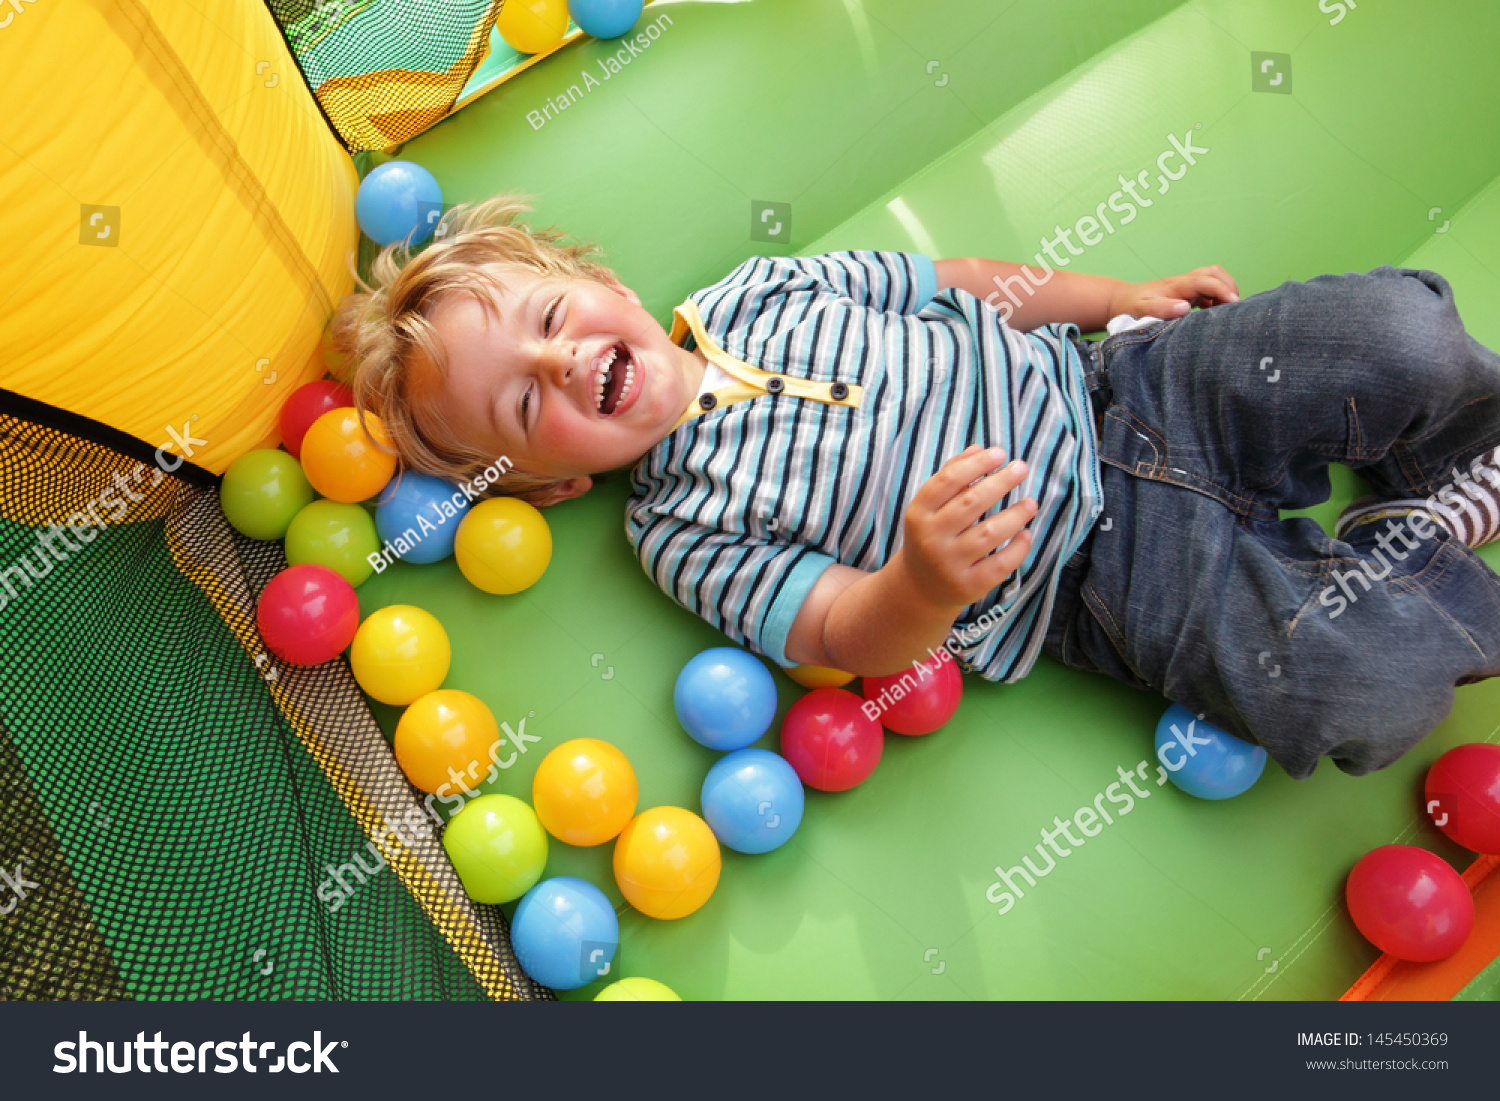 2 year old boy smiling on an inflatable bouncy castle #145450369